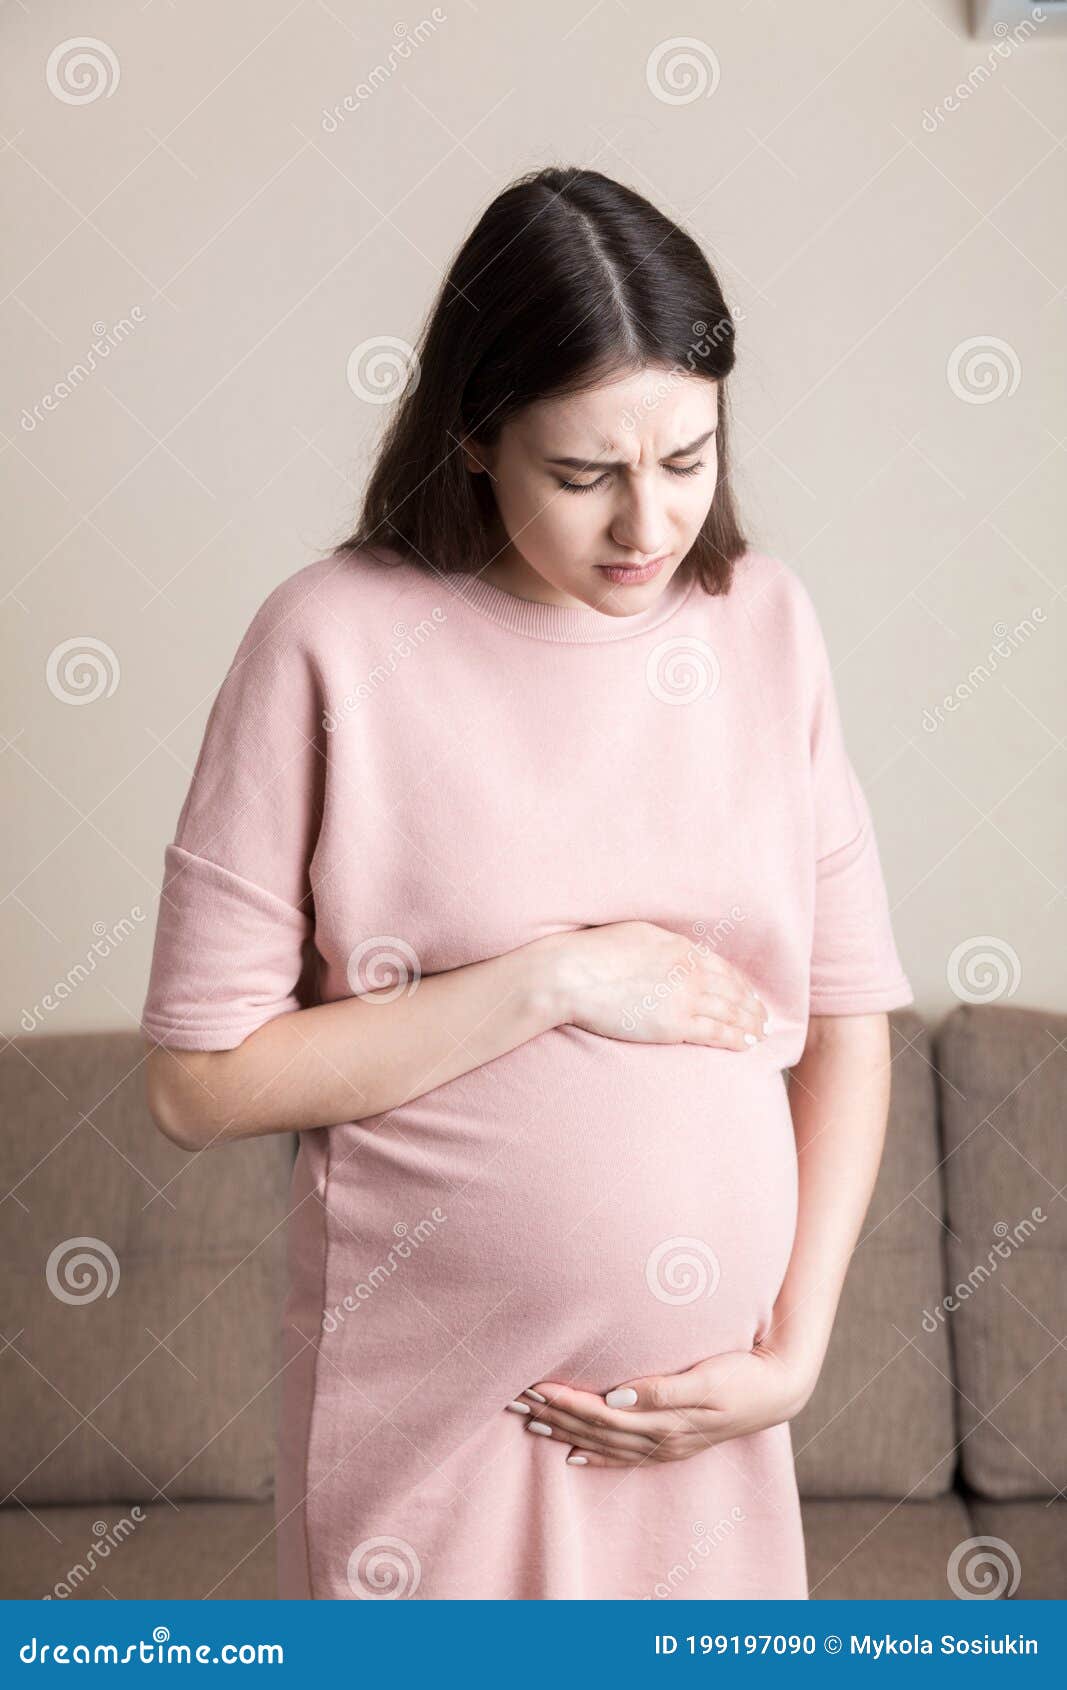 https://thumbs.dreamstime.com/z/pregnant-lady-having-massaging-lower-belly-sitting-sofa-indoor-pregnancy-problems-concept-maternity-healthcare-pregnant-lady-199197090.jpg